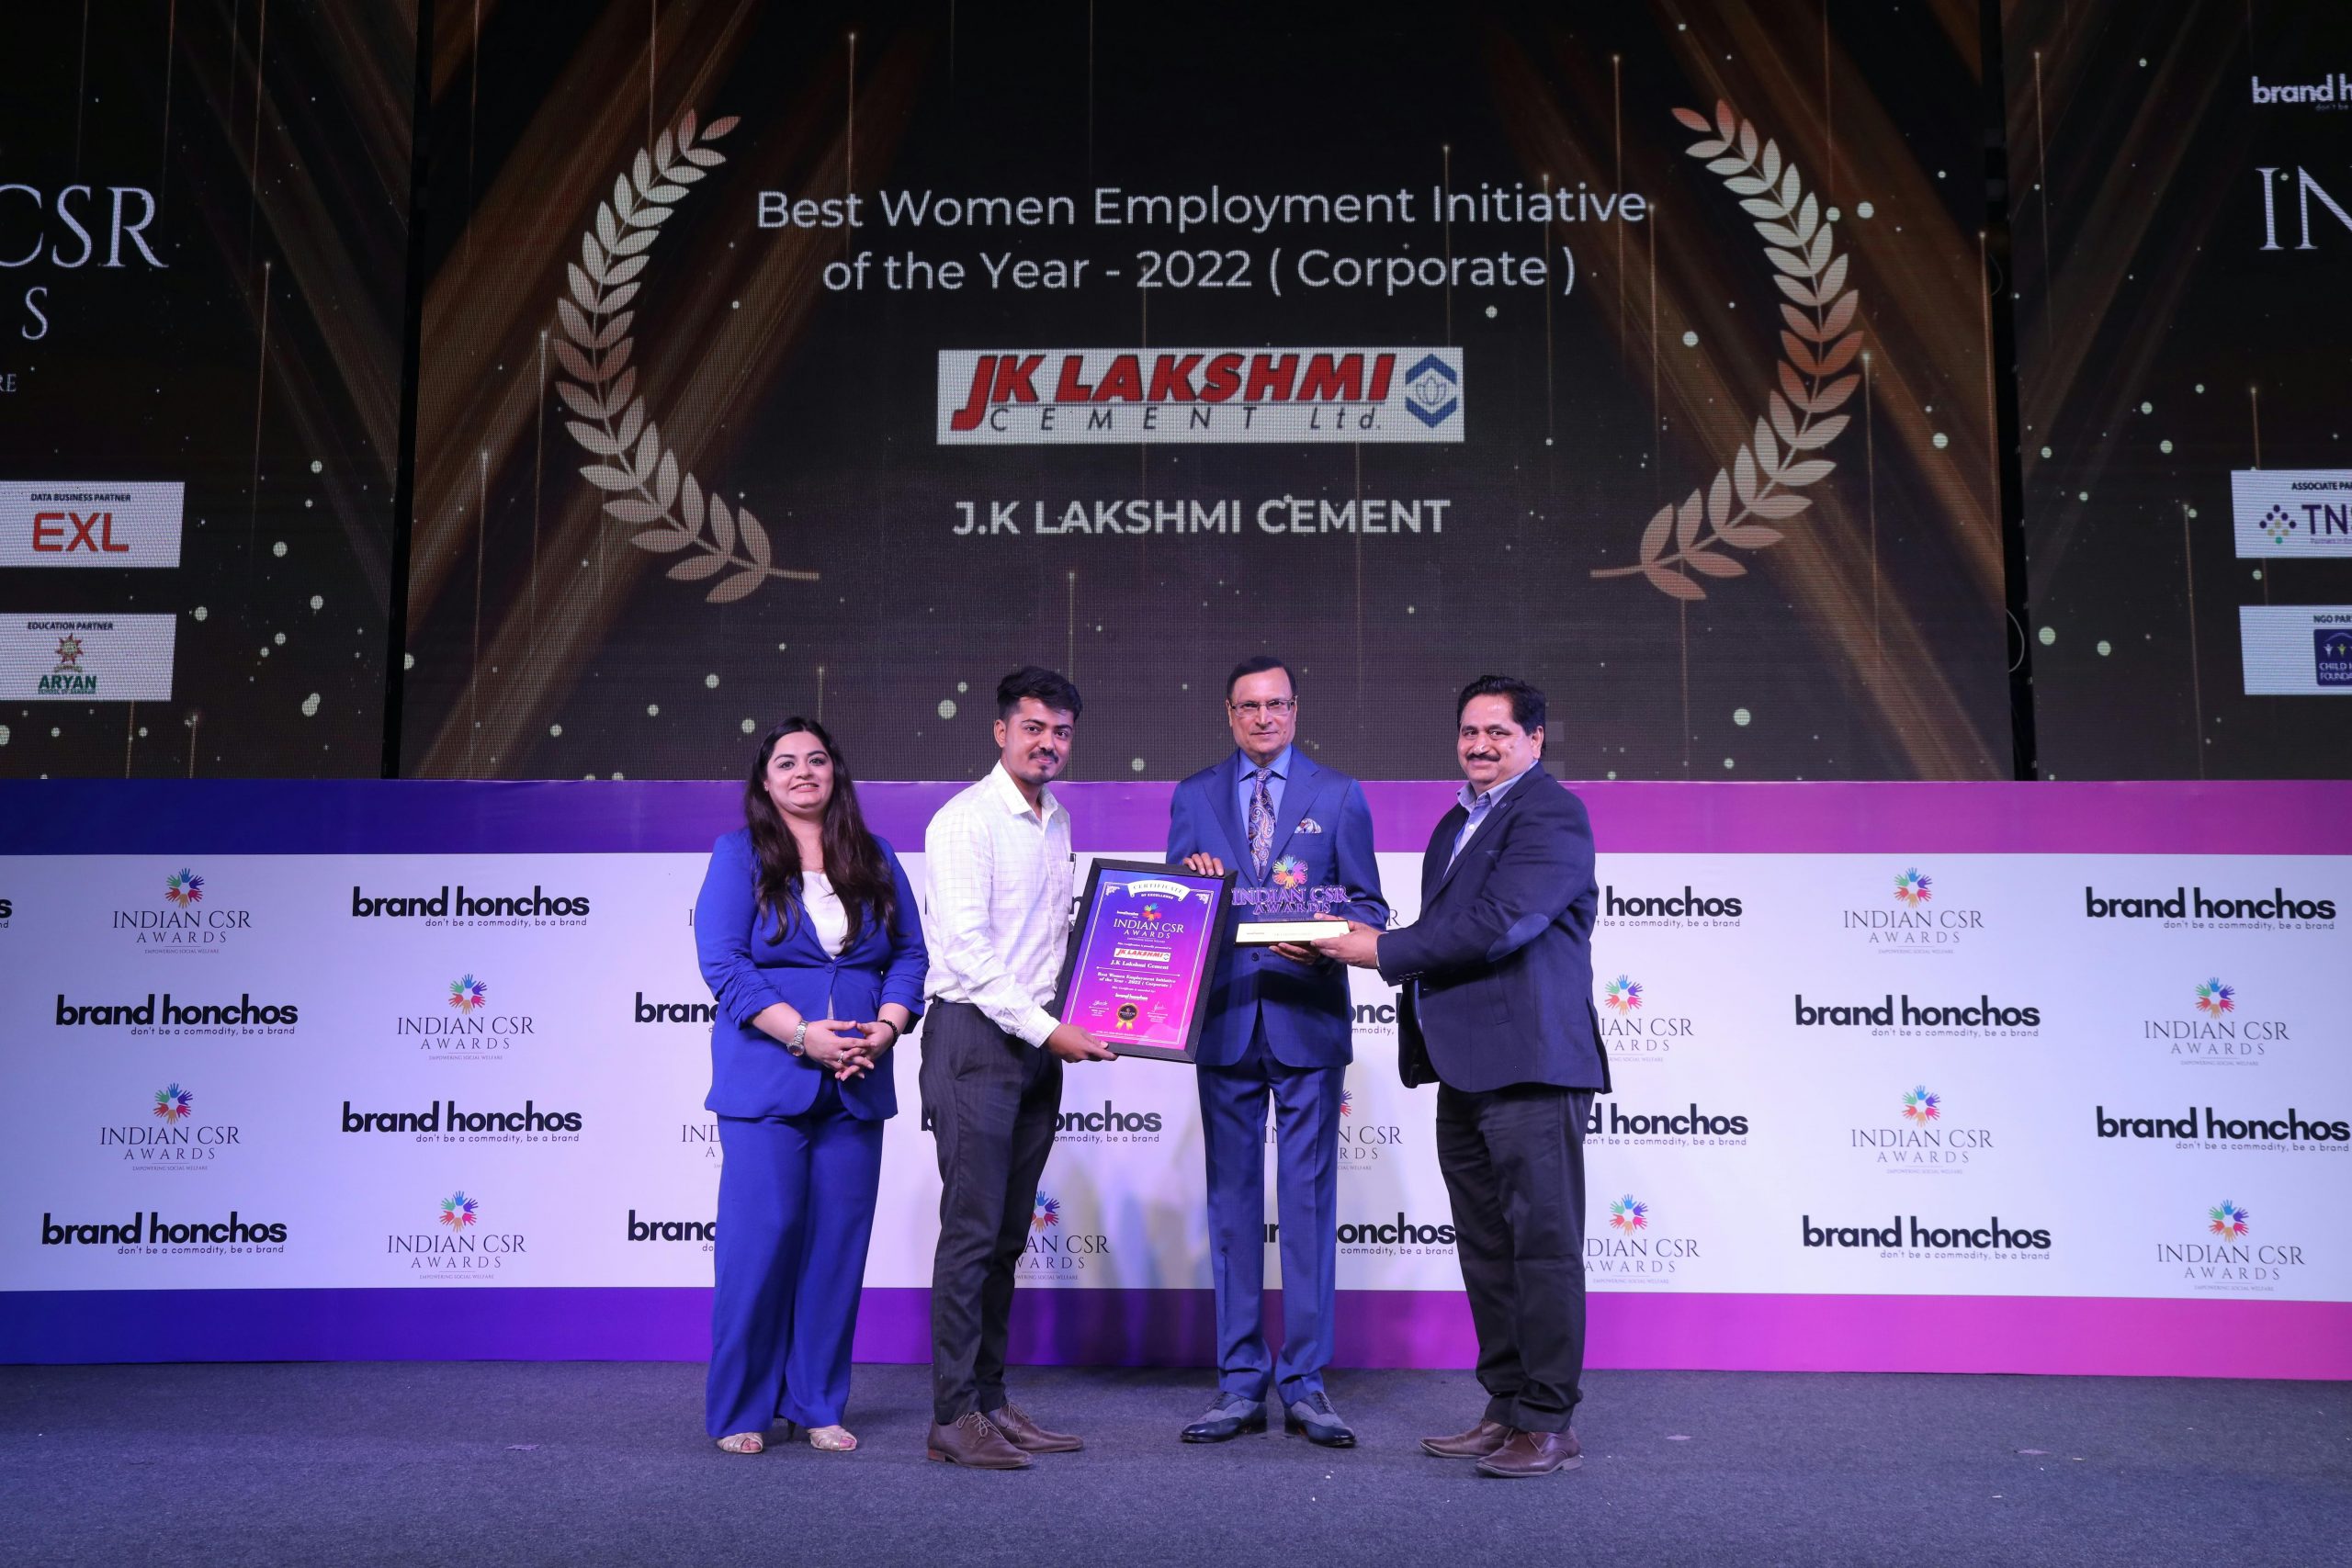 Indian CSR Award for Best Women Employment Initiative of the Year (Corporate), 2022